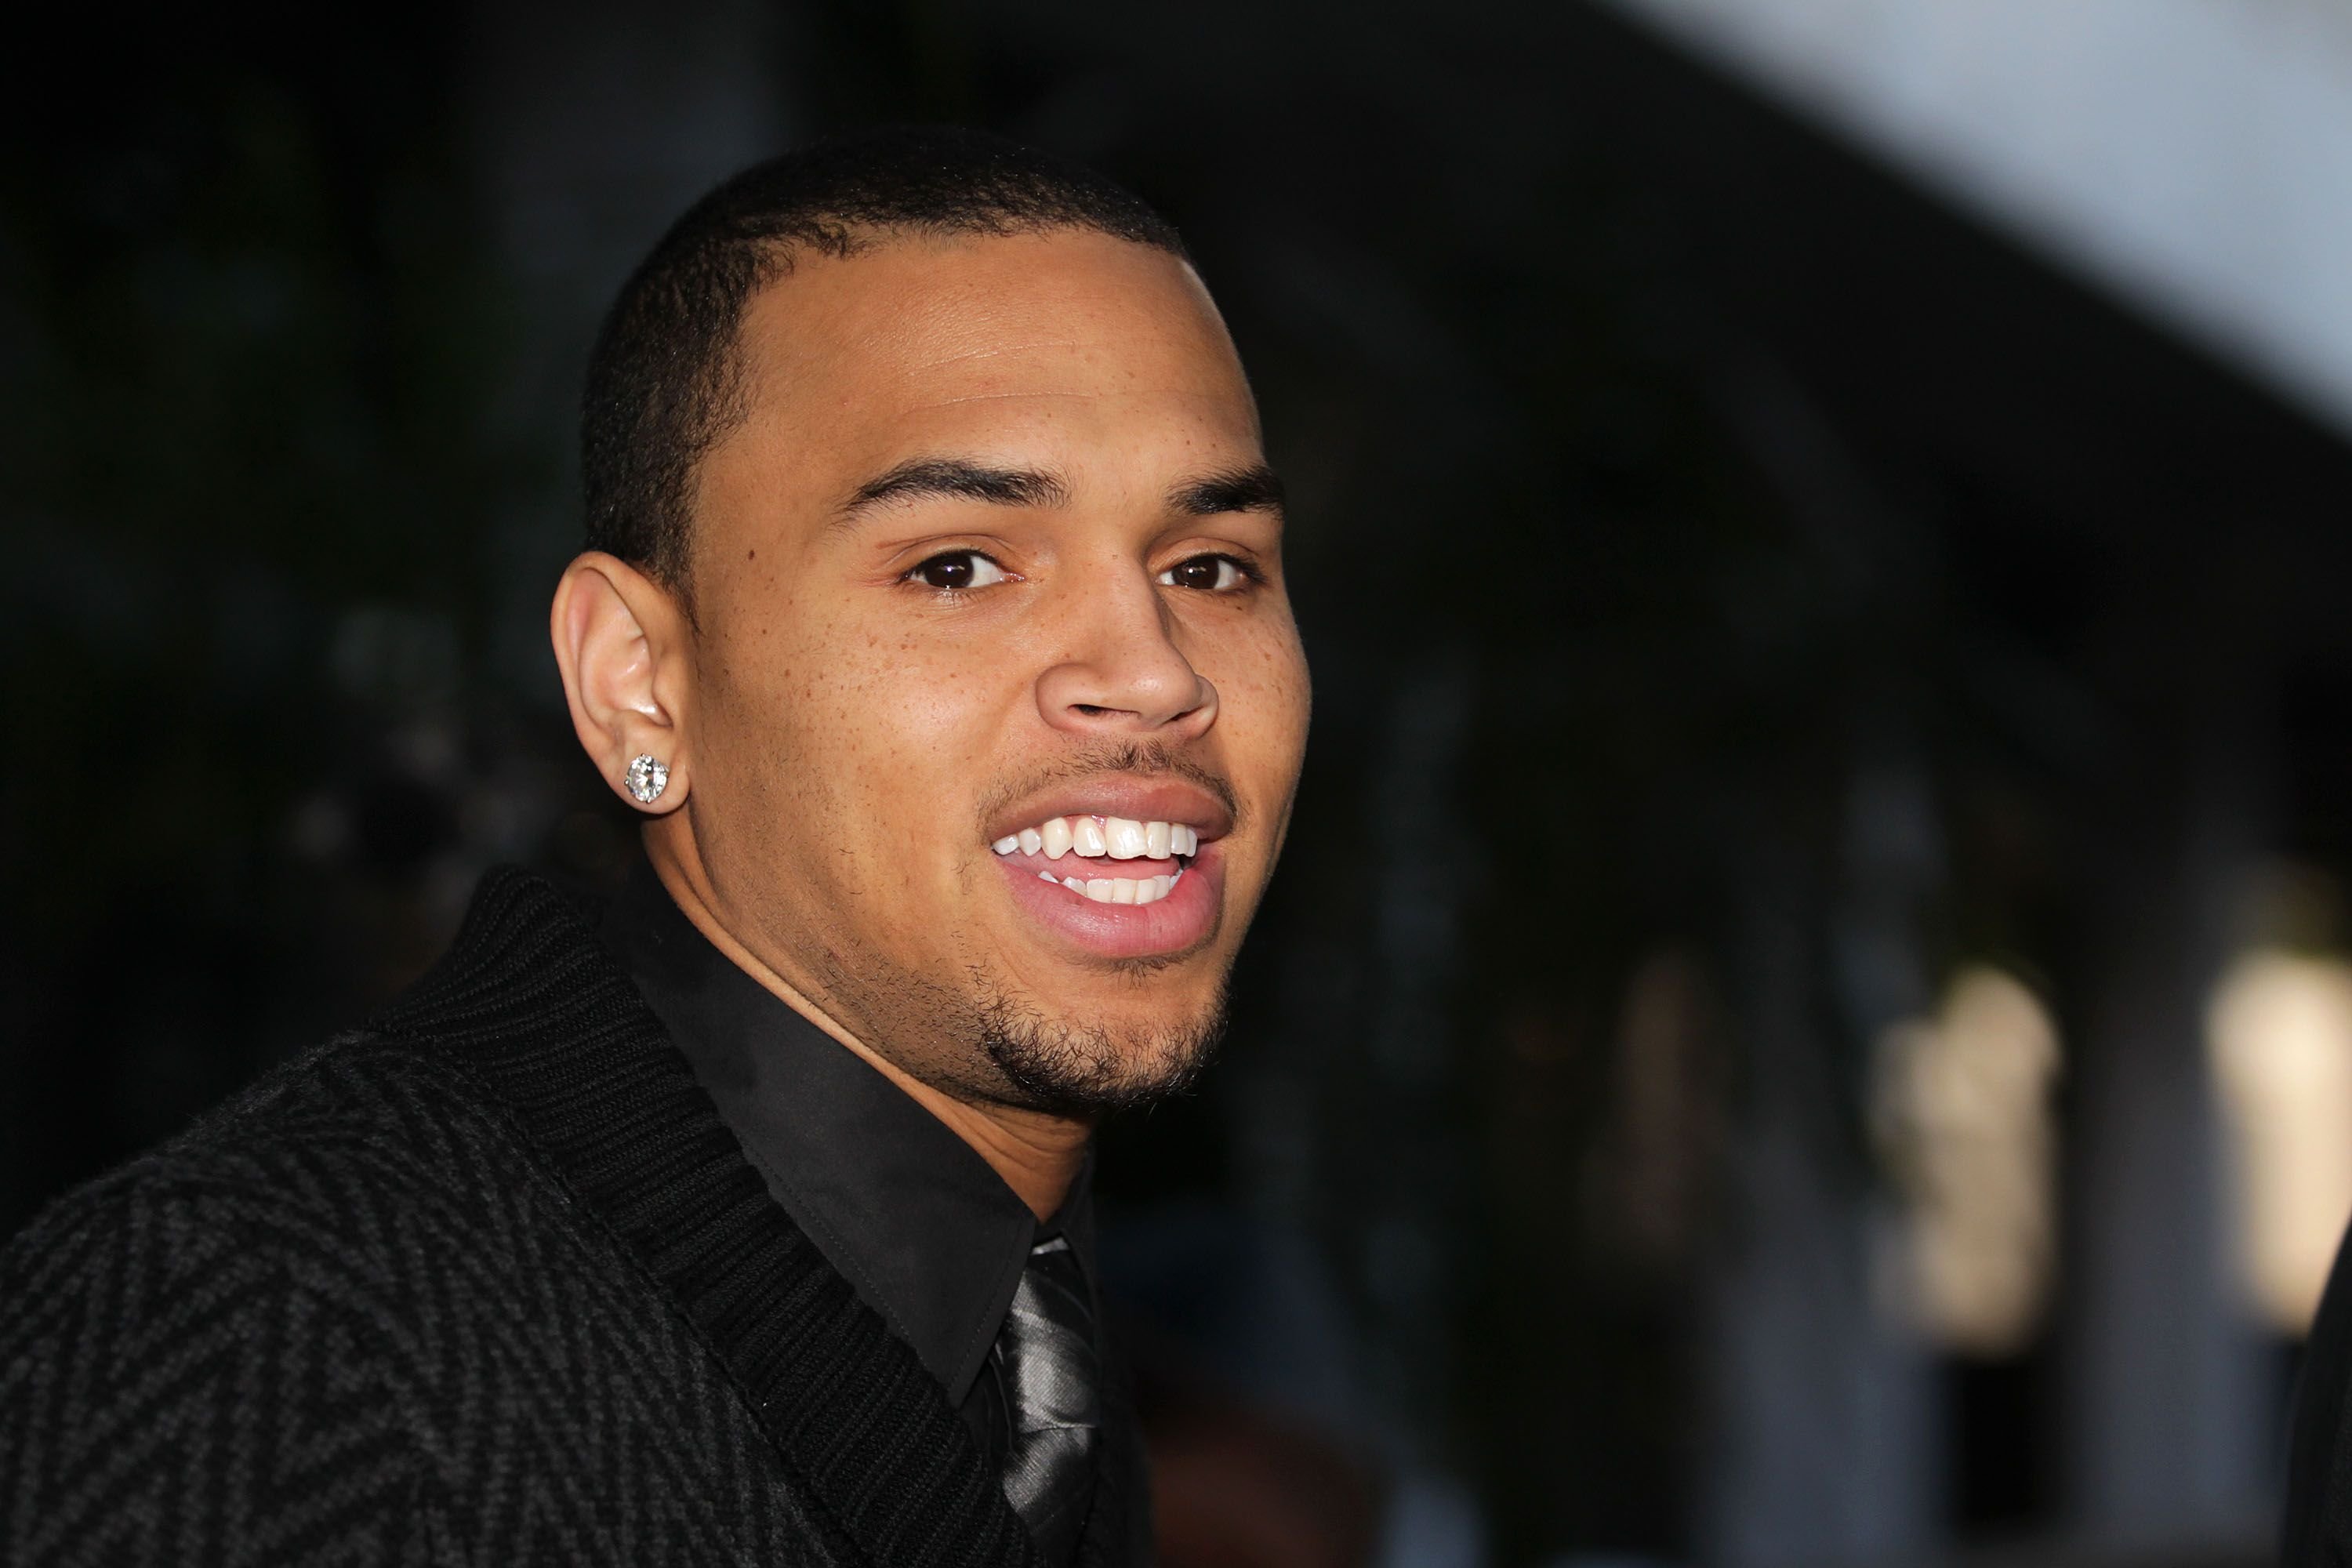 Chris Brown at the Los Angeles courthouse after a probation progress hearing on January 28, 2011 in Los Angeles, California. Brown pleaded guilty to assaulting his then-girlfriend, singer Rihanna, after a pre-Grammy Awards party in 2009. | Source: Getty Images